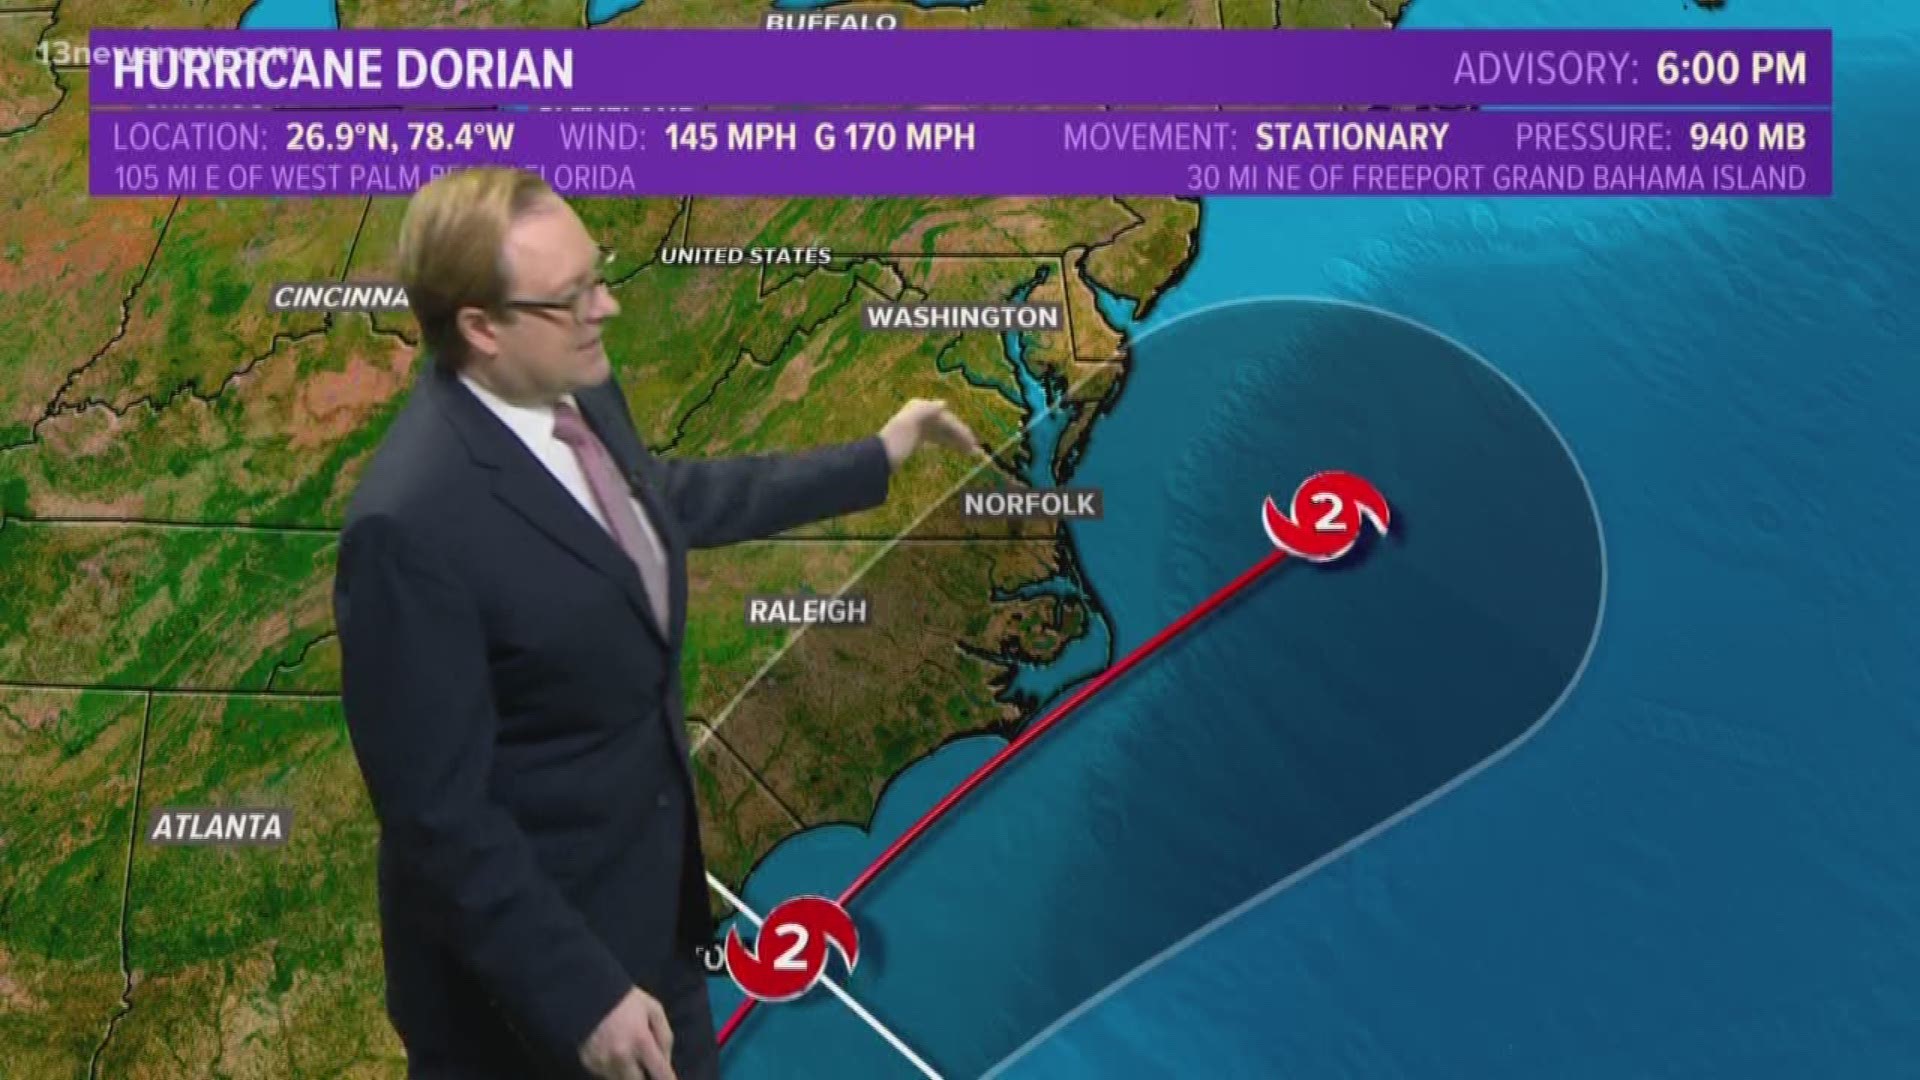 13News Now Meteorologist Evan Stewart gives an update on Hurricane Dorian. The category 4 story is almost at a standstill over the Bahamas. Spaghetti plots show the storm to remain off the coast for its trip north.